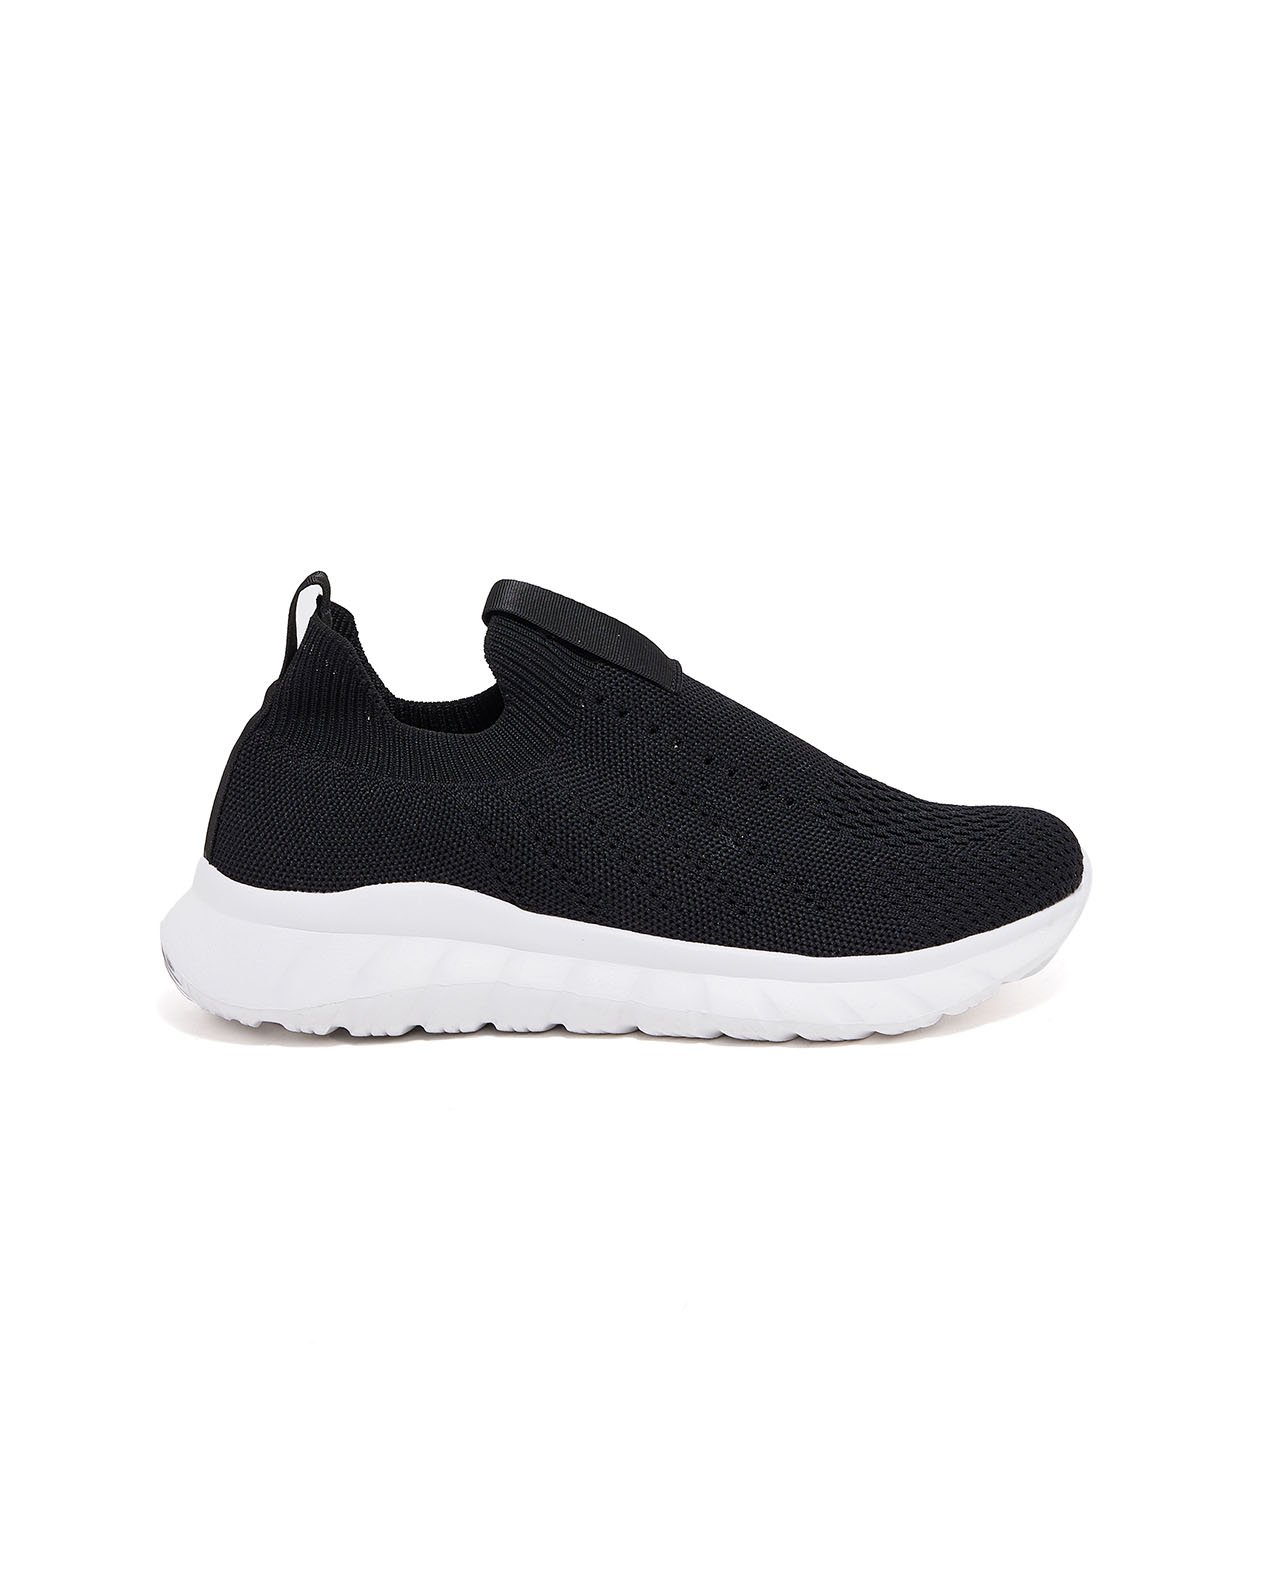 Shop Knitted Slip-On Shoes Online | R&B UAE